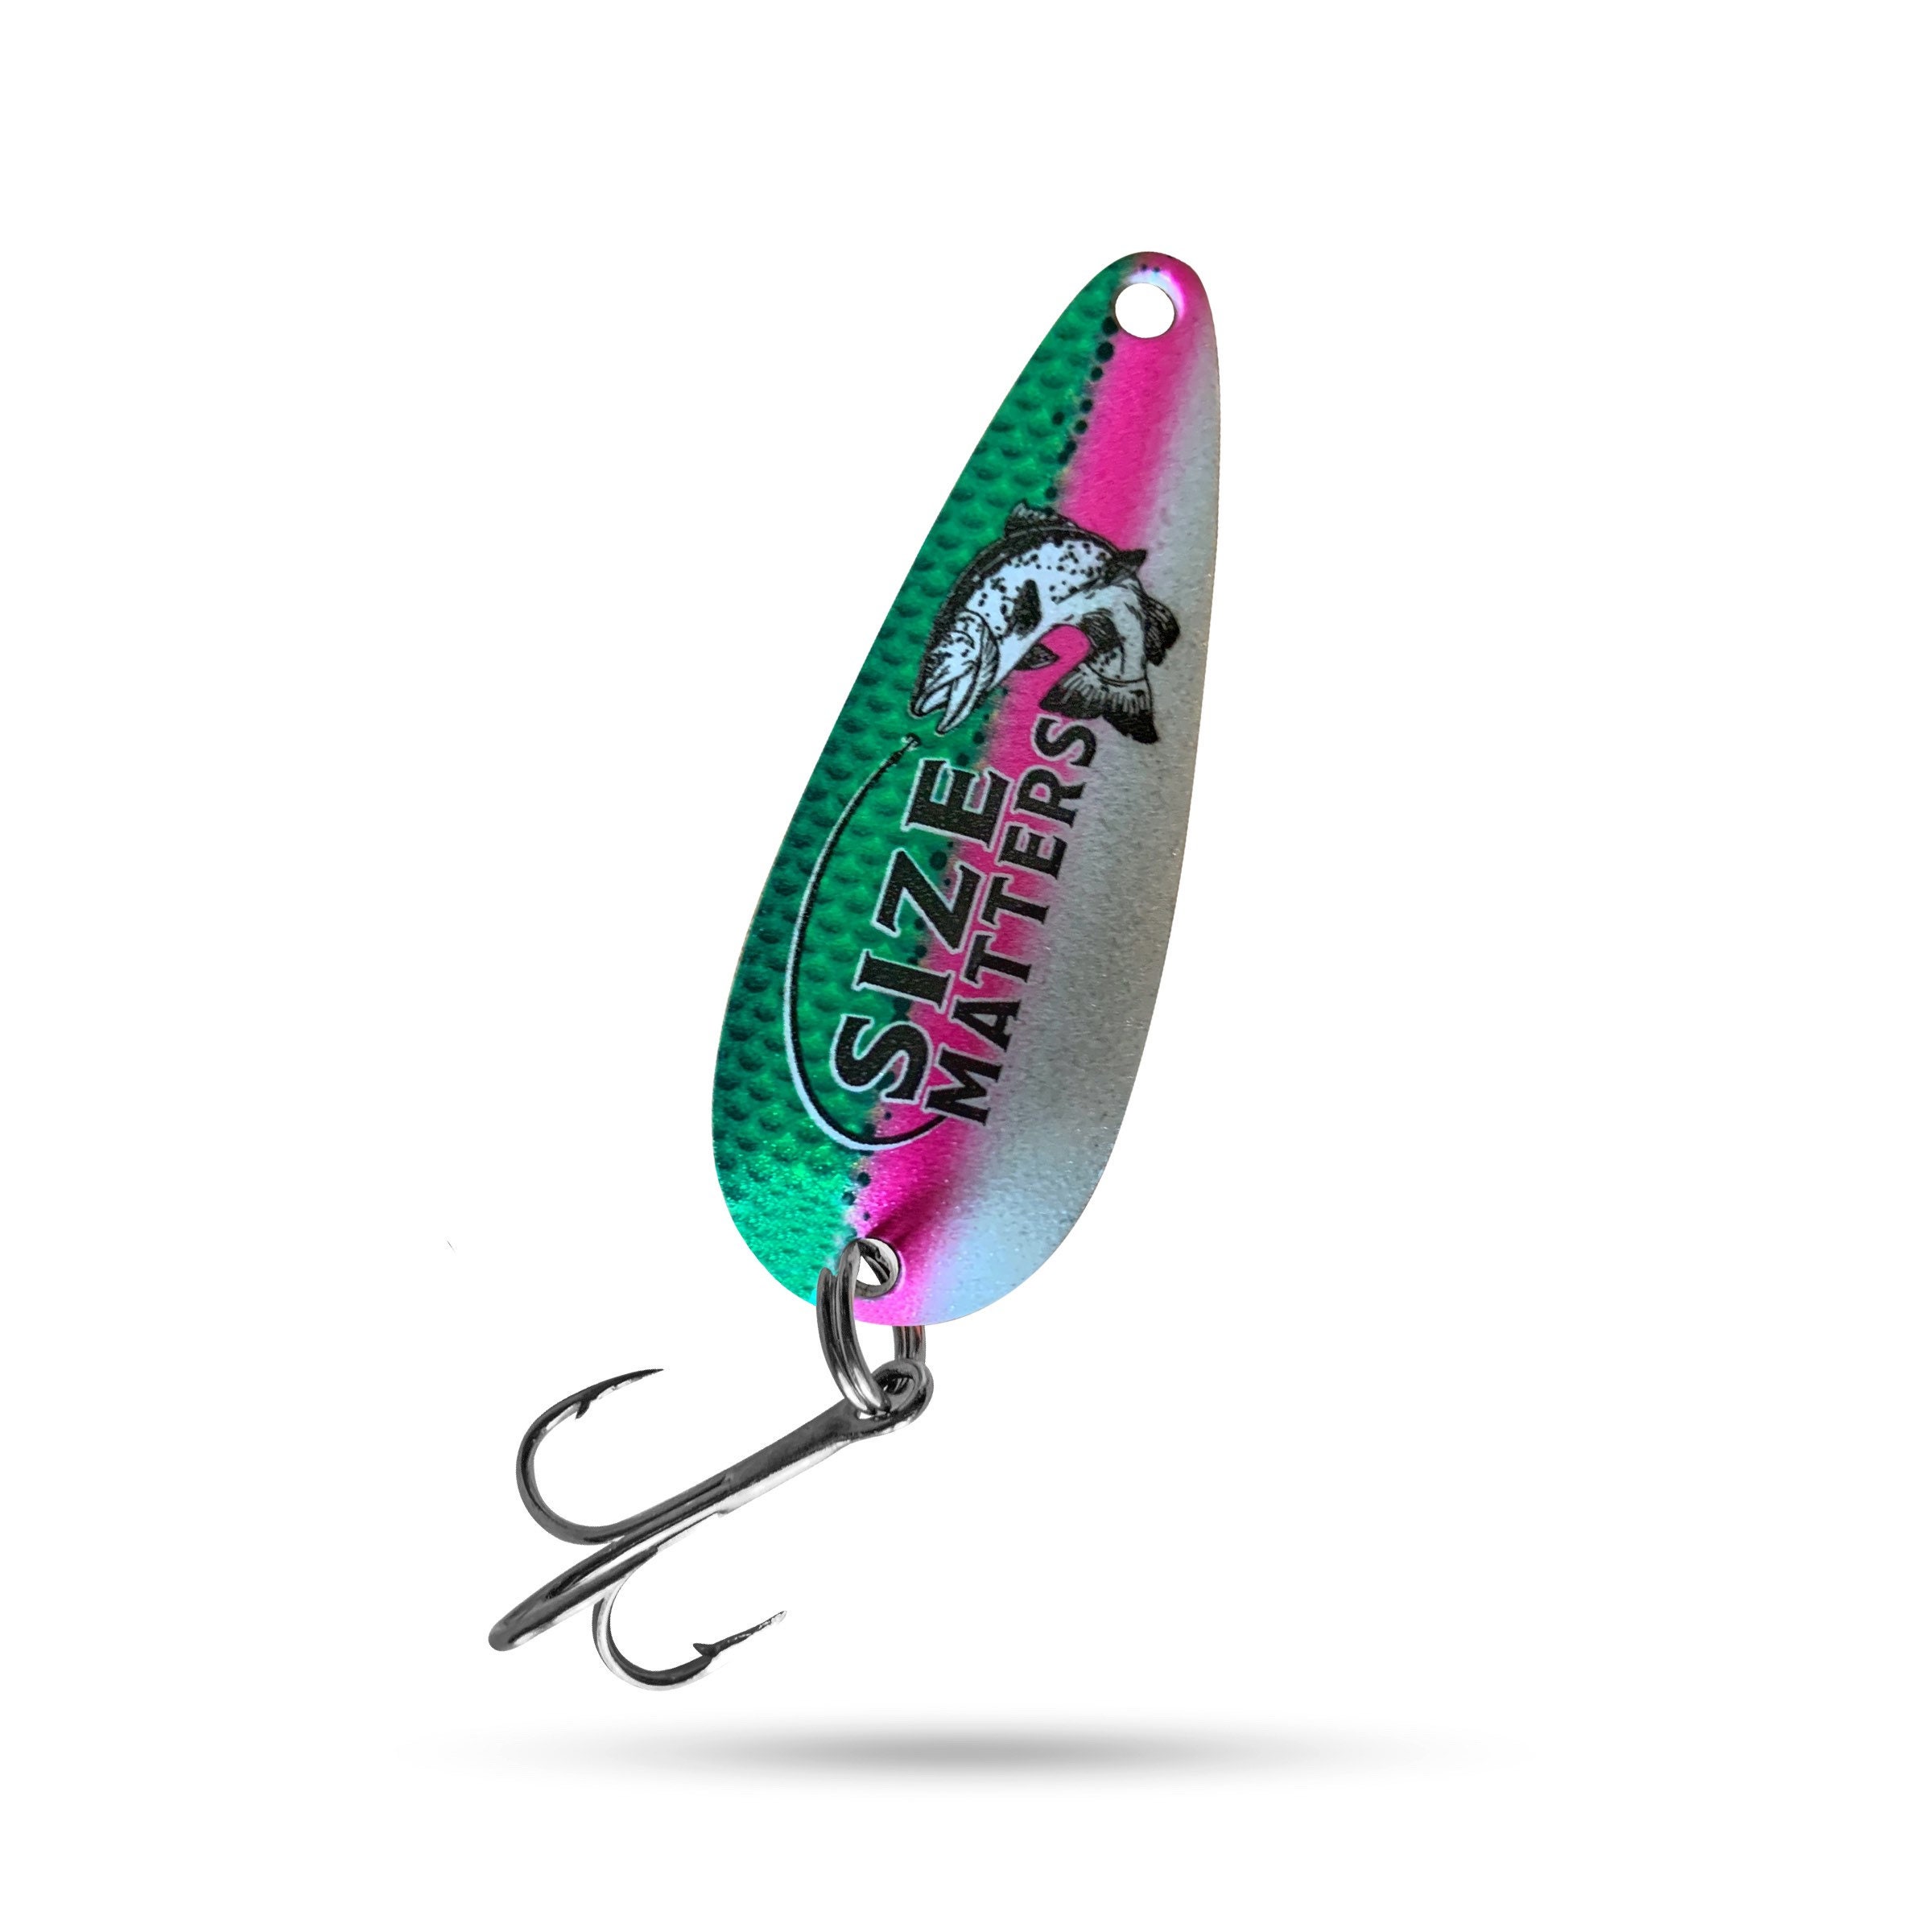 Buy Funny Fishing Lure Size Matters Funny Fishing Gifts for Him